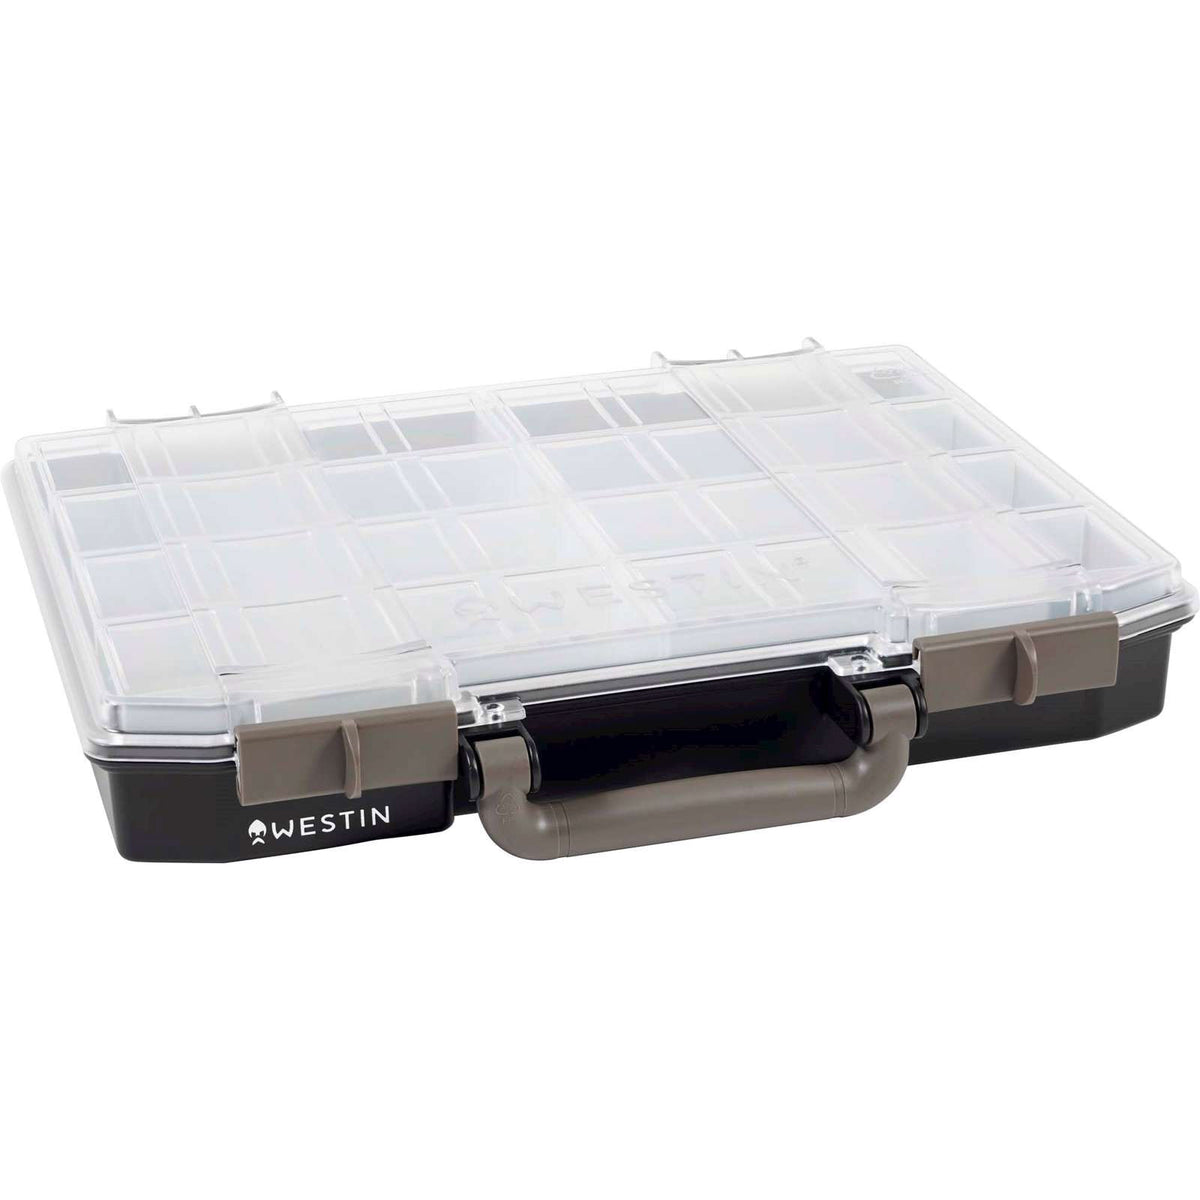 Westin W6 Lure Vault Tackle Boxes - Black/Clear 57 x 337 x 278 with 10 inserts